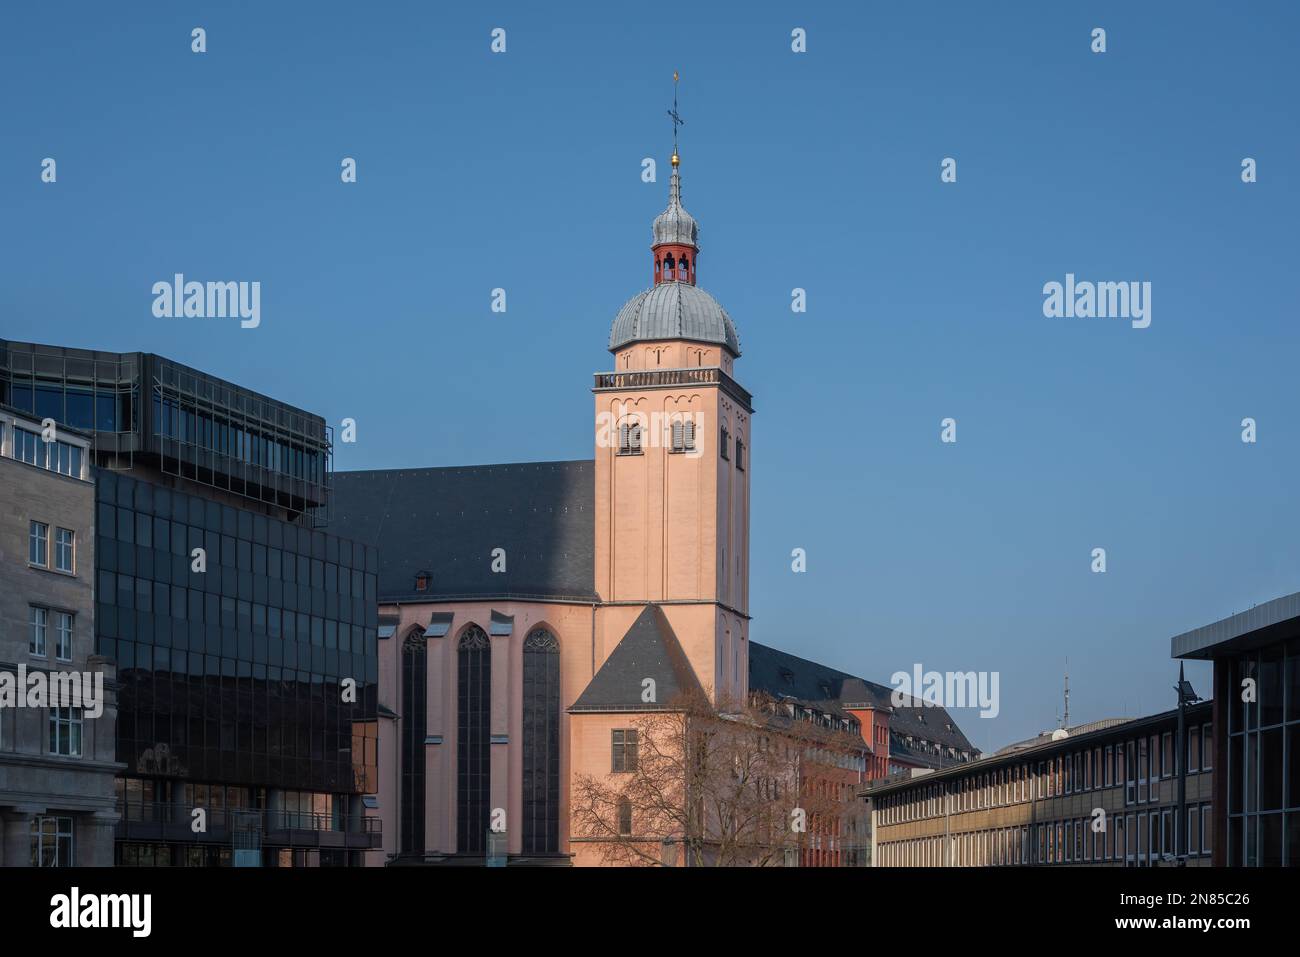 St Mary of the Assumption Church (St. Maria Himmelfahrt) - Cologne, Germany Stock Photo